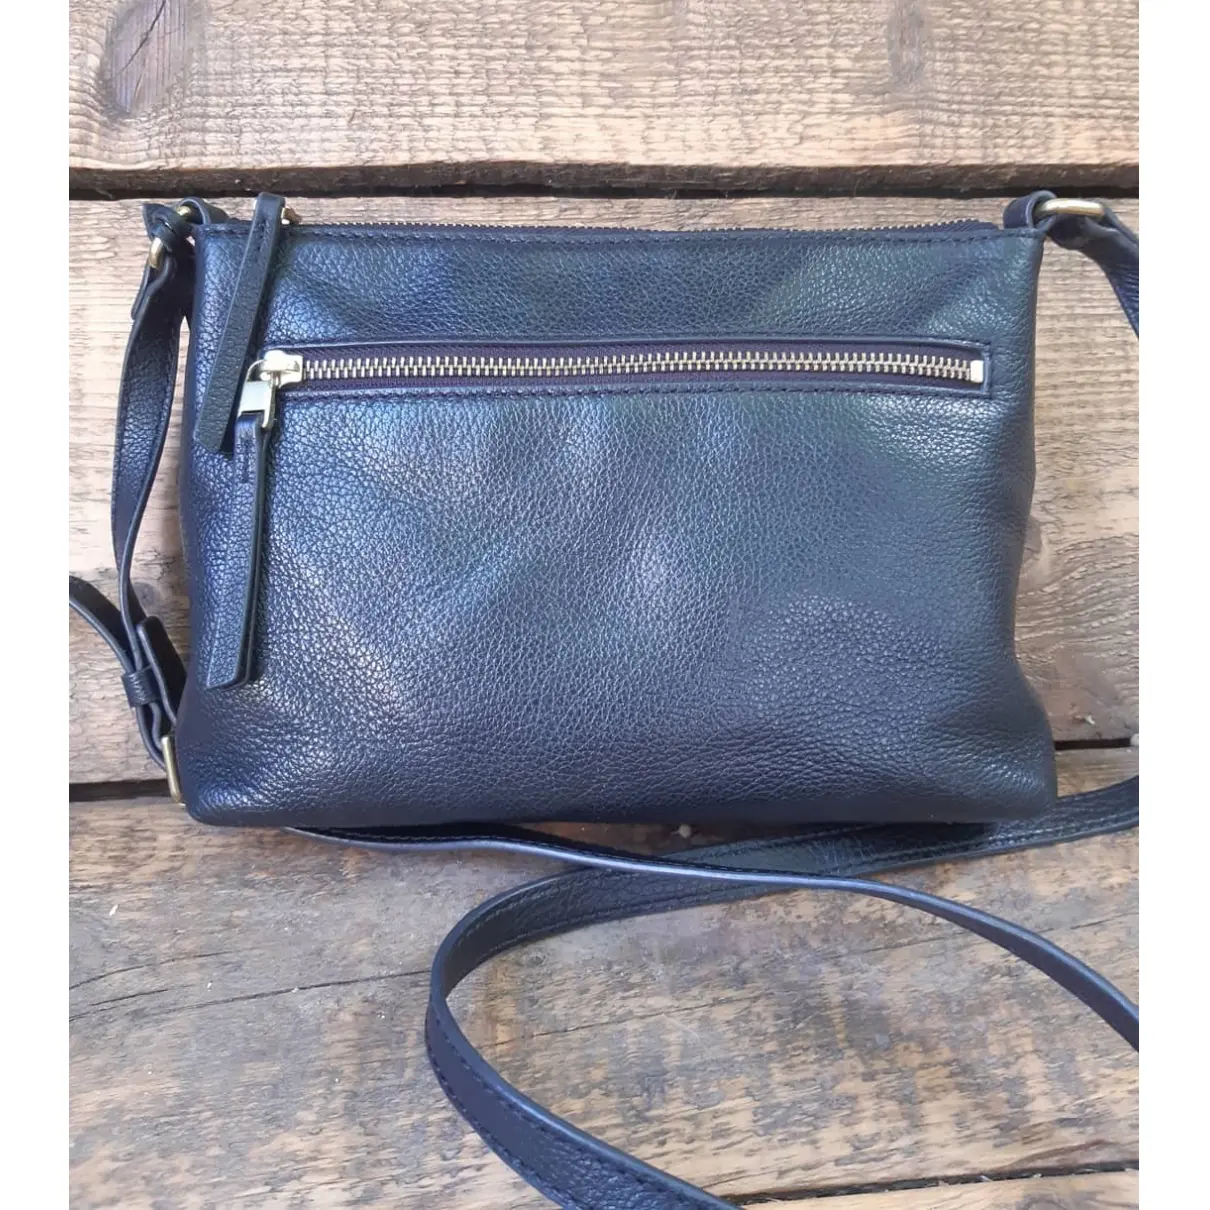 Buy Fossil Leather crossbody bag online